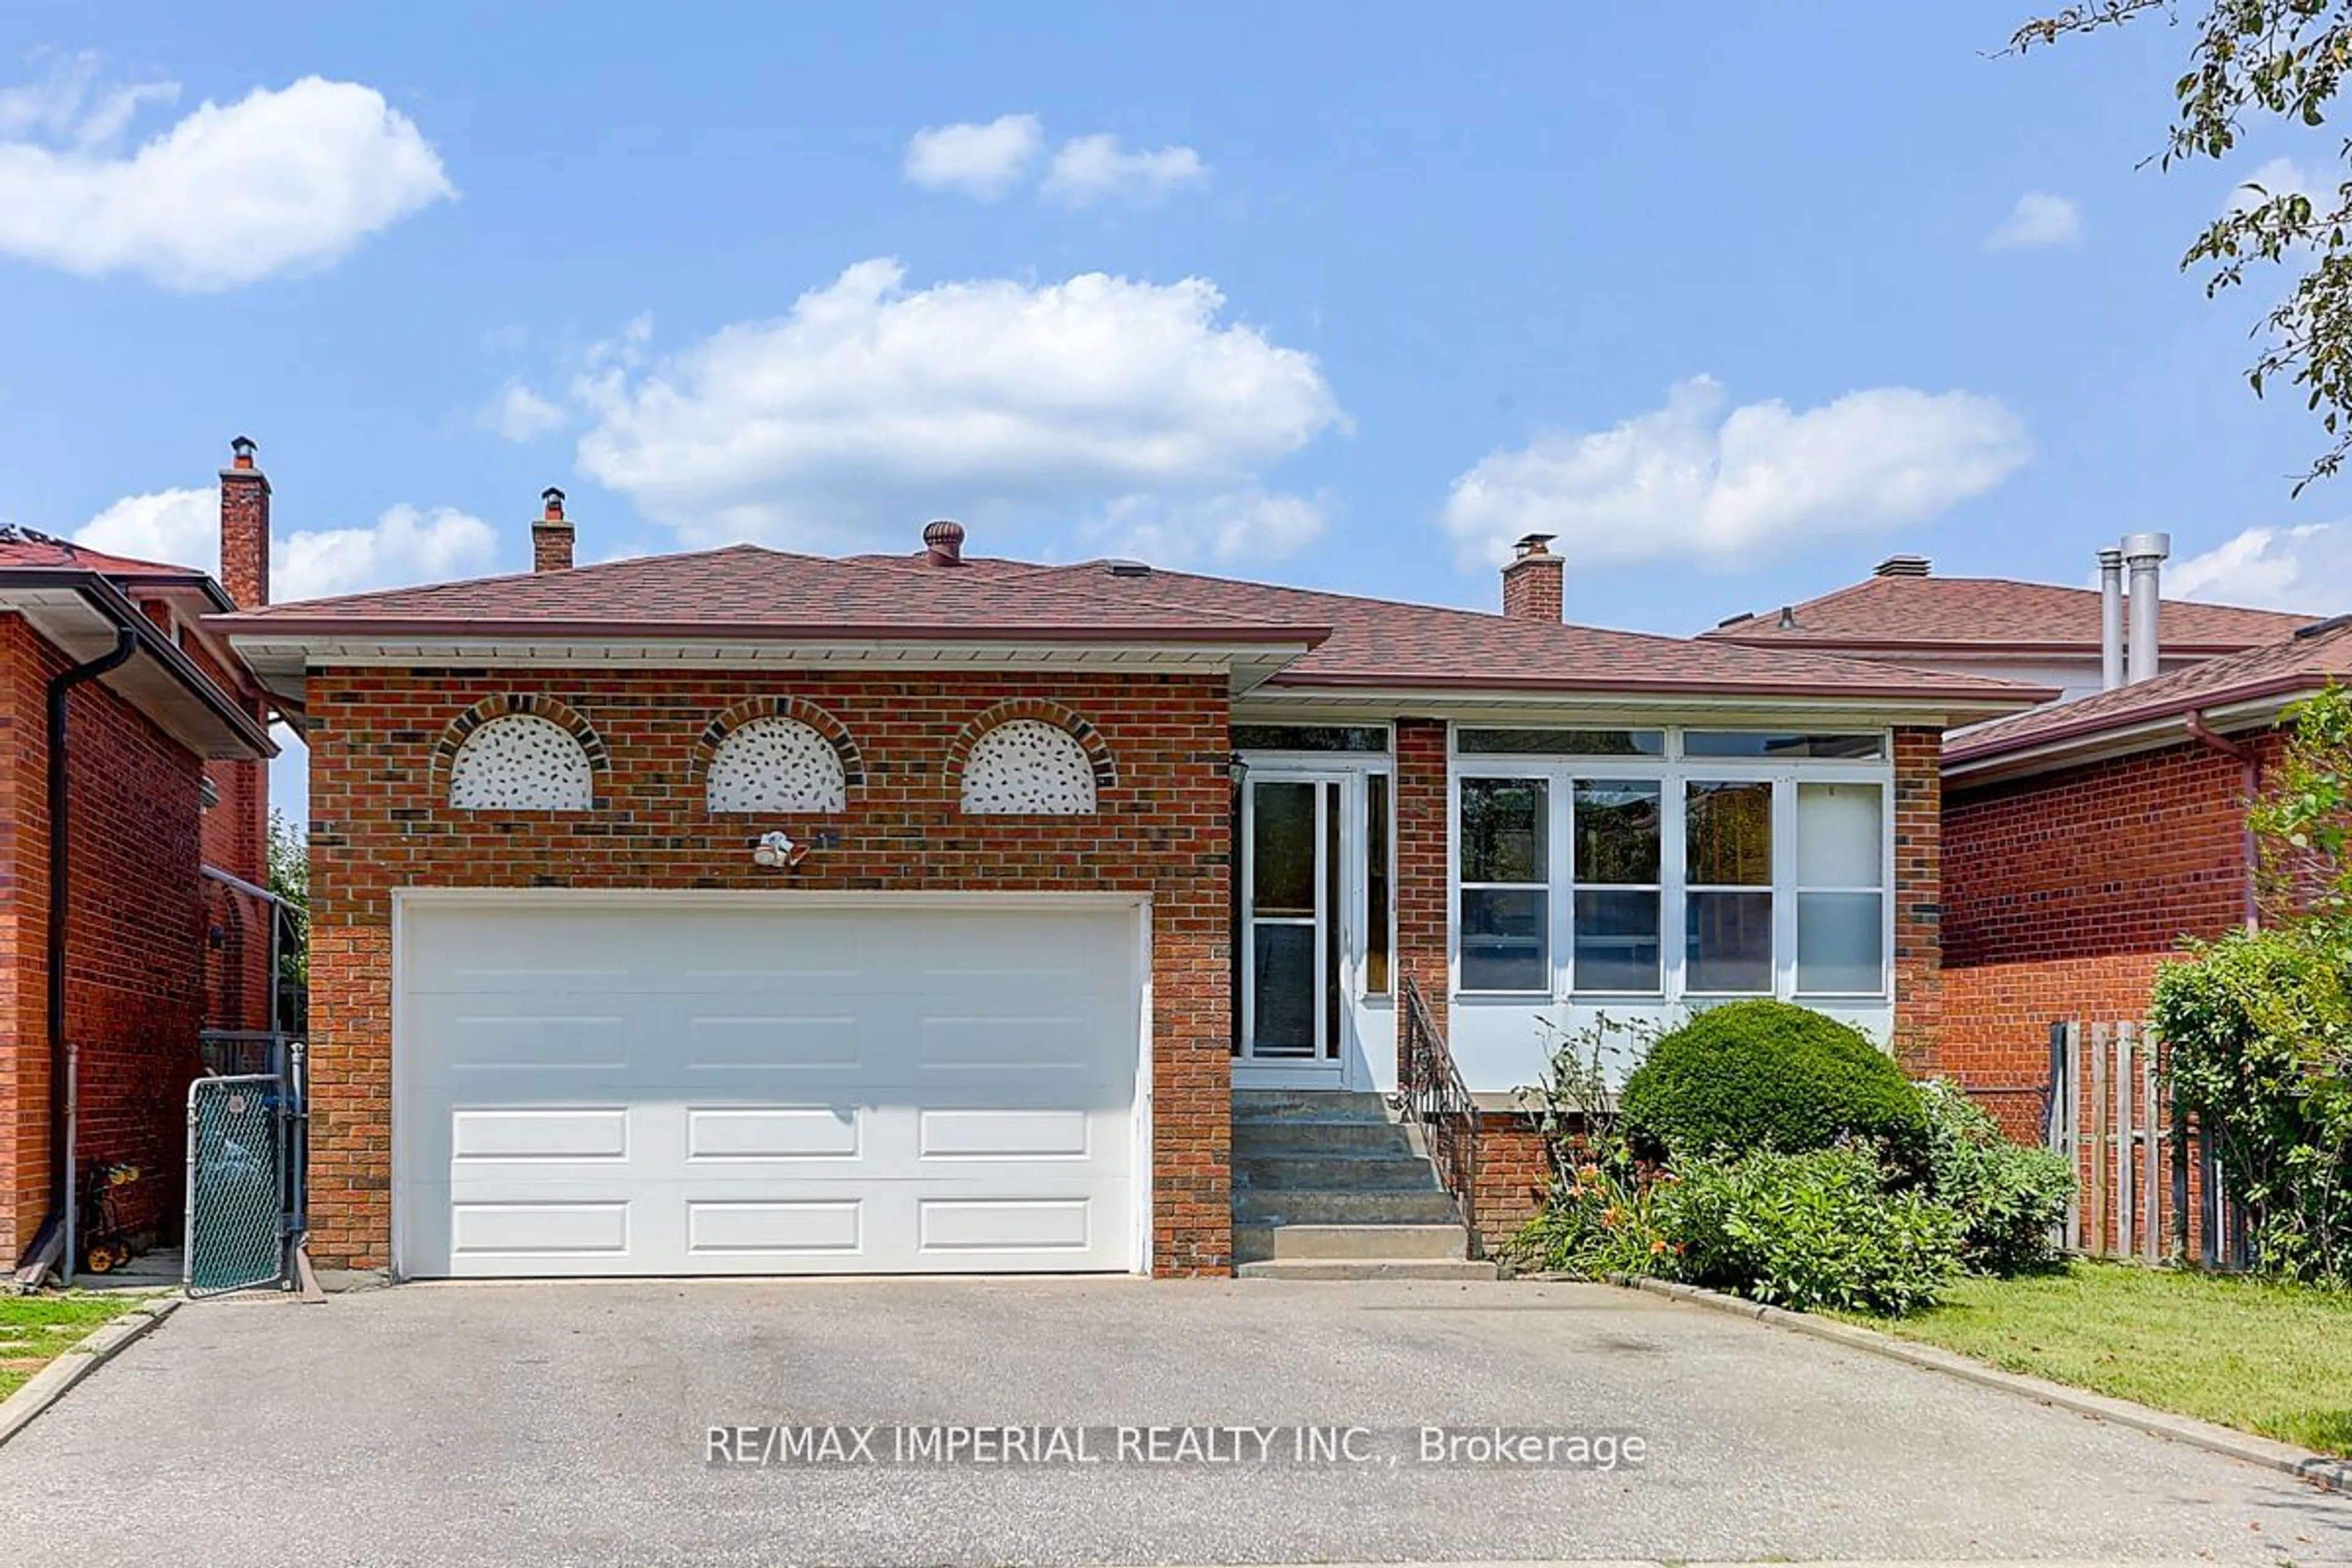 Home with brick exterior material for 16 Glendinning Ave, Toronto Ontario M1W 3G2